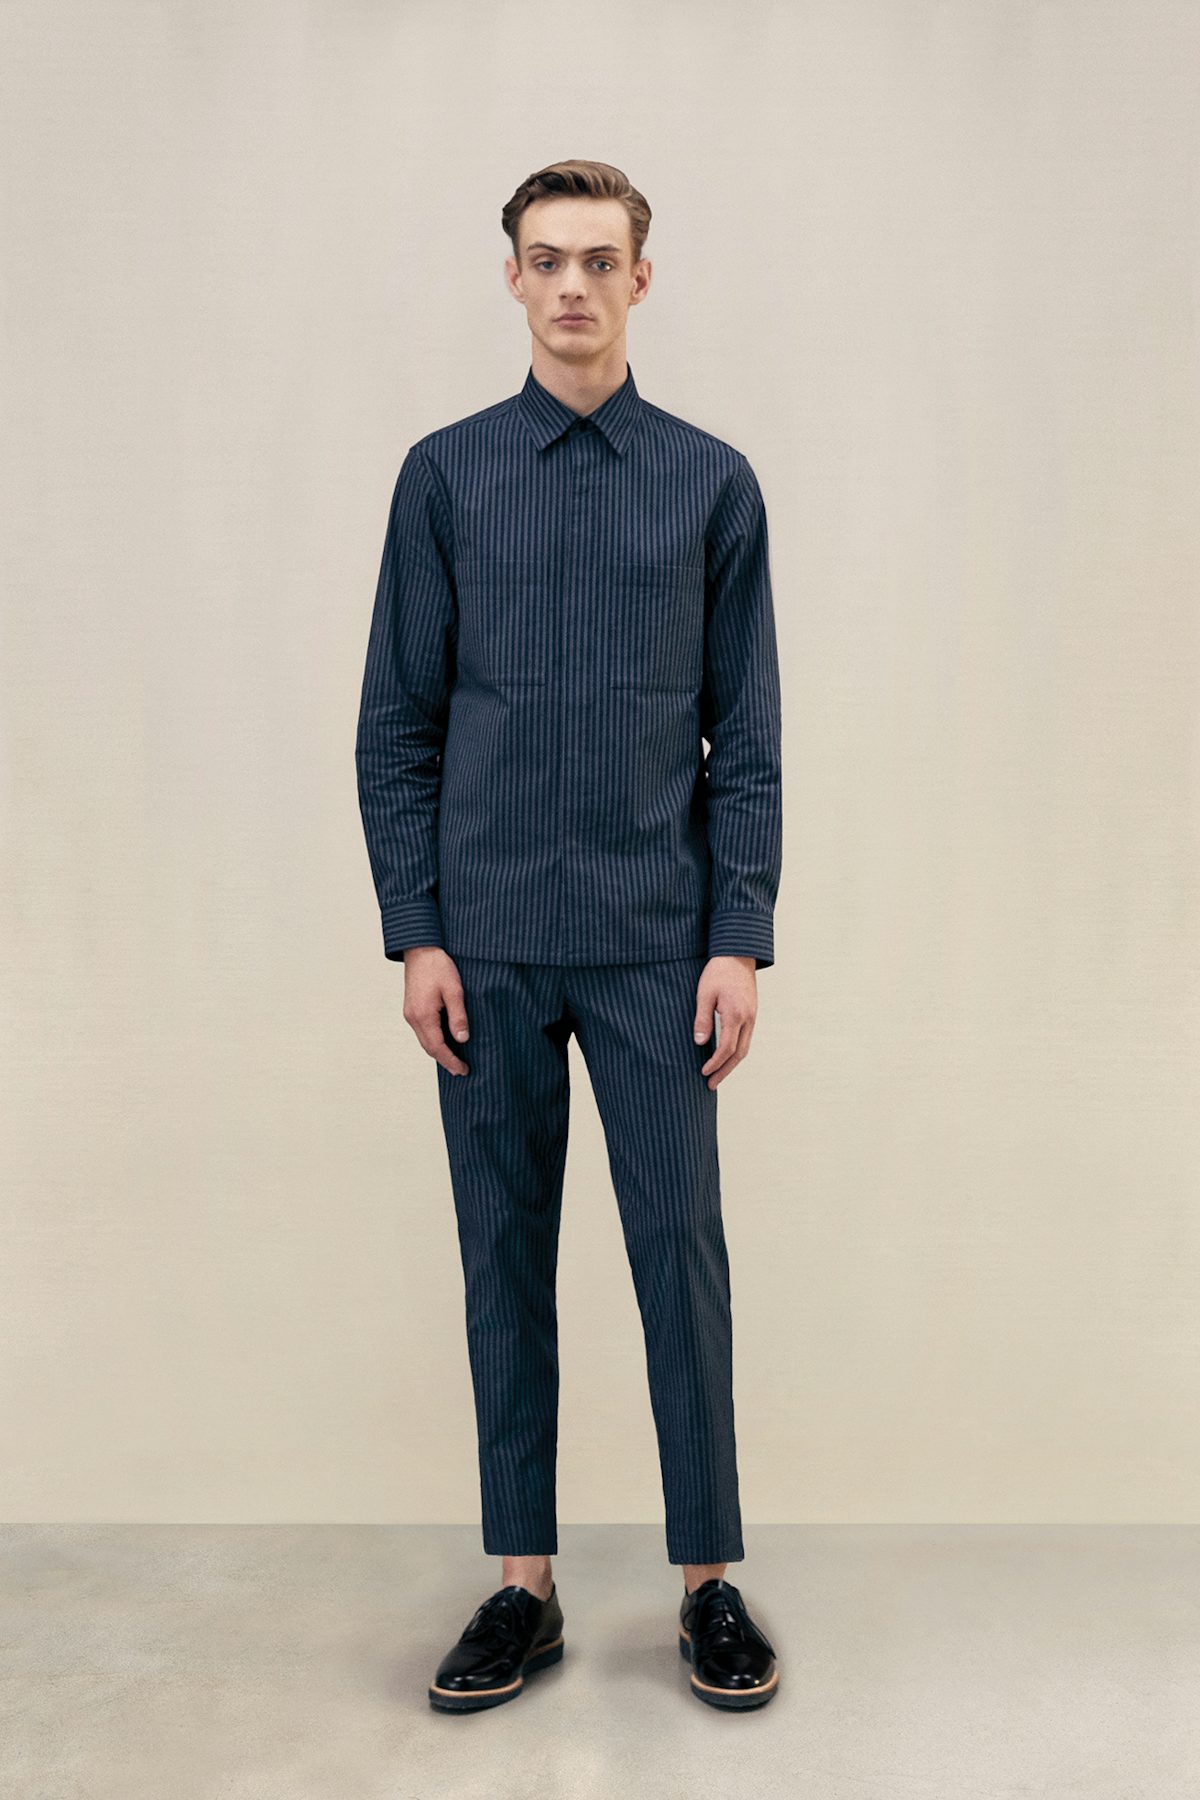 Theory Men's Spring 2019 Lookbook | Theory's Projects | BoF Careers ...